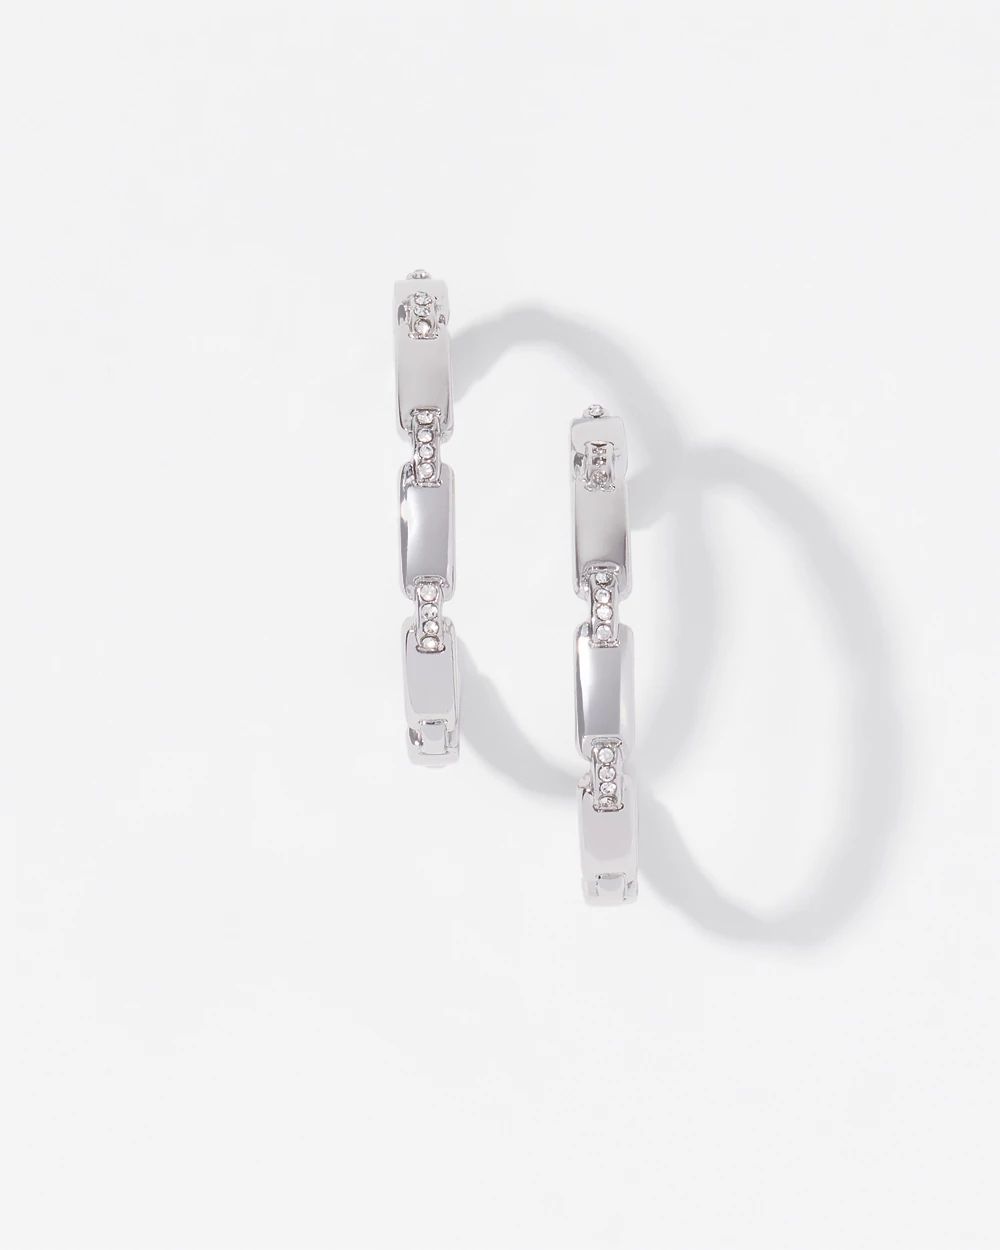 Silver Pave Link Hoop Earrings click to view larger image.